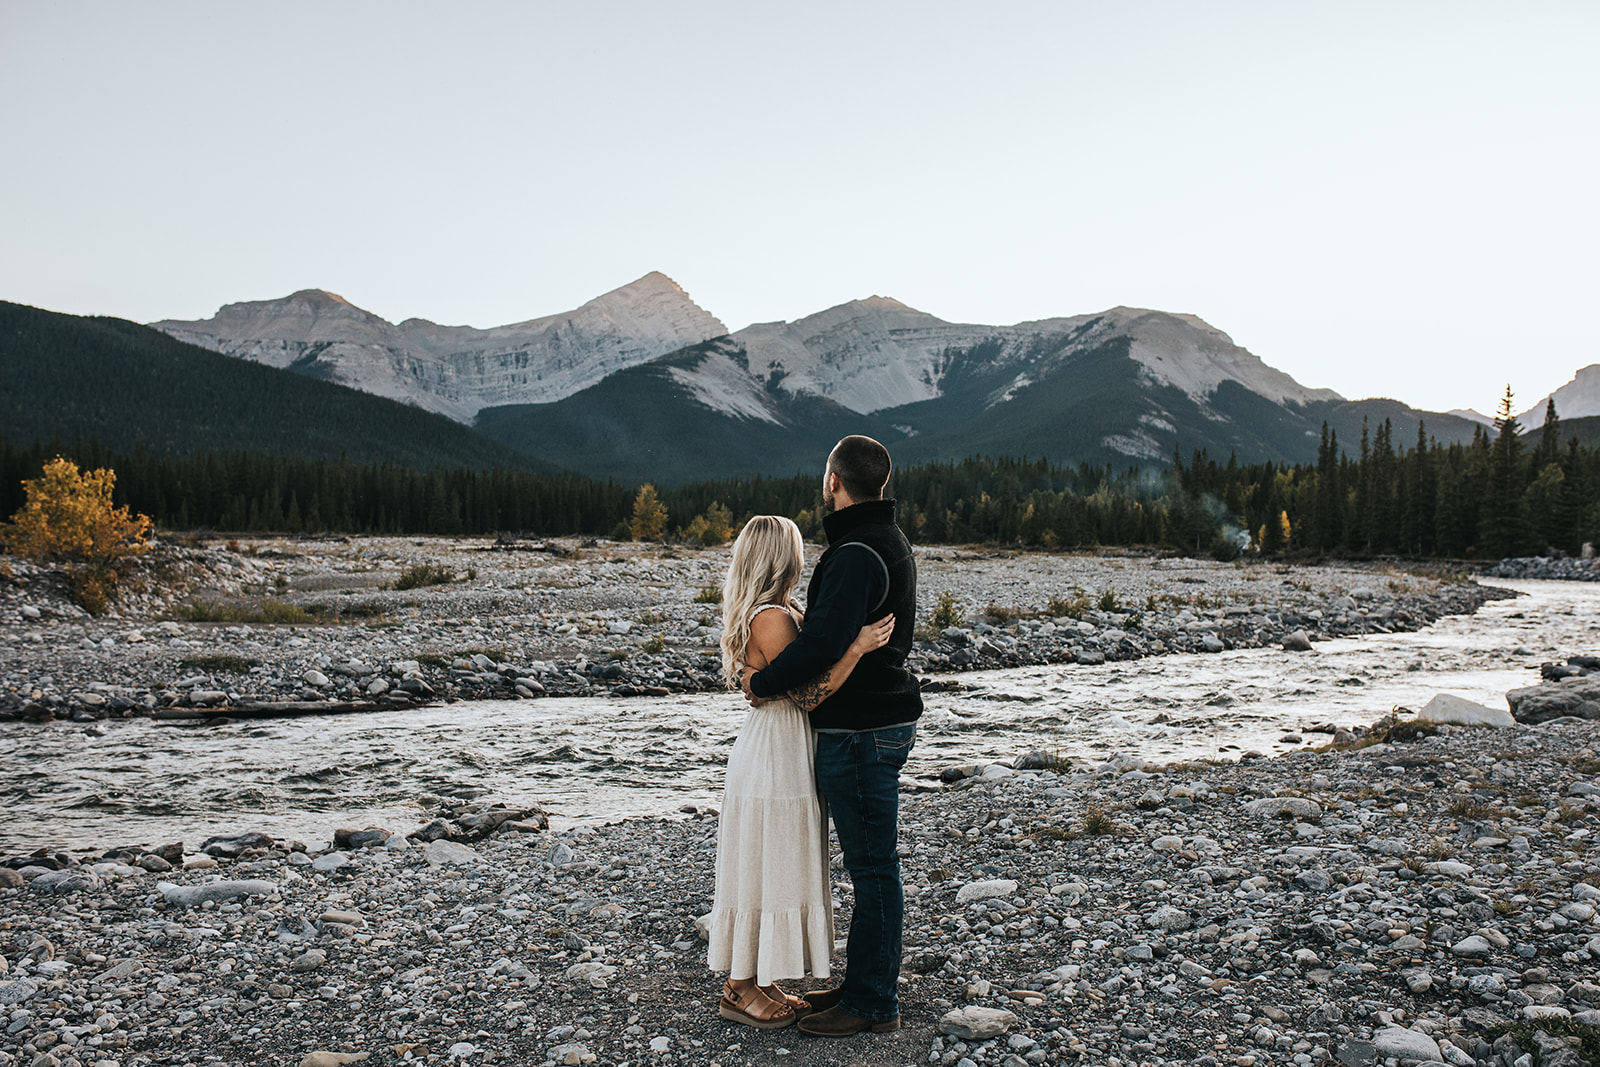 Calgary Engagement Photographer: Capturing Magical Moments at Forget Me Not Pond
